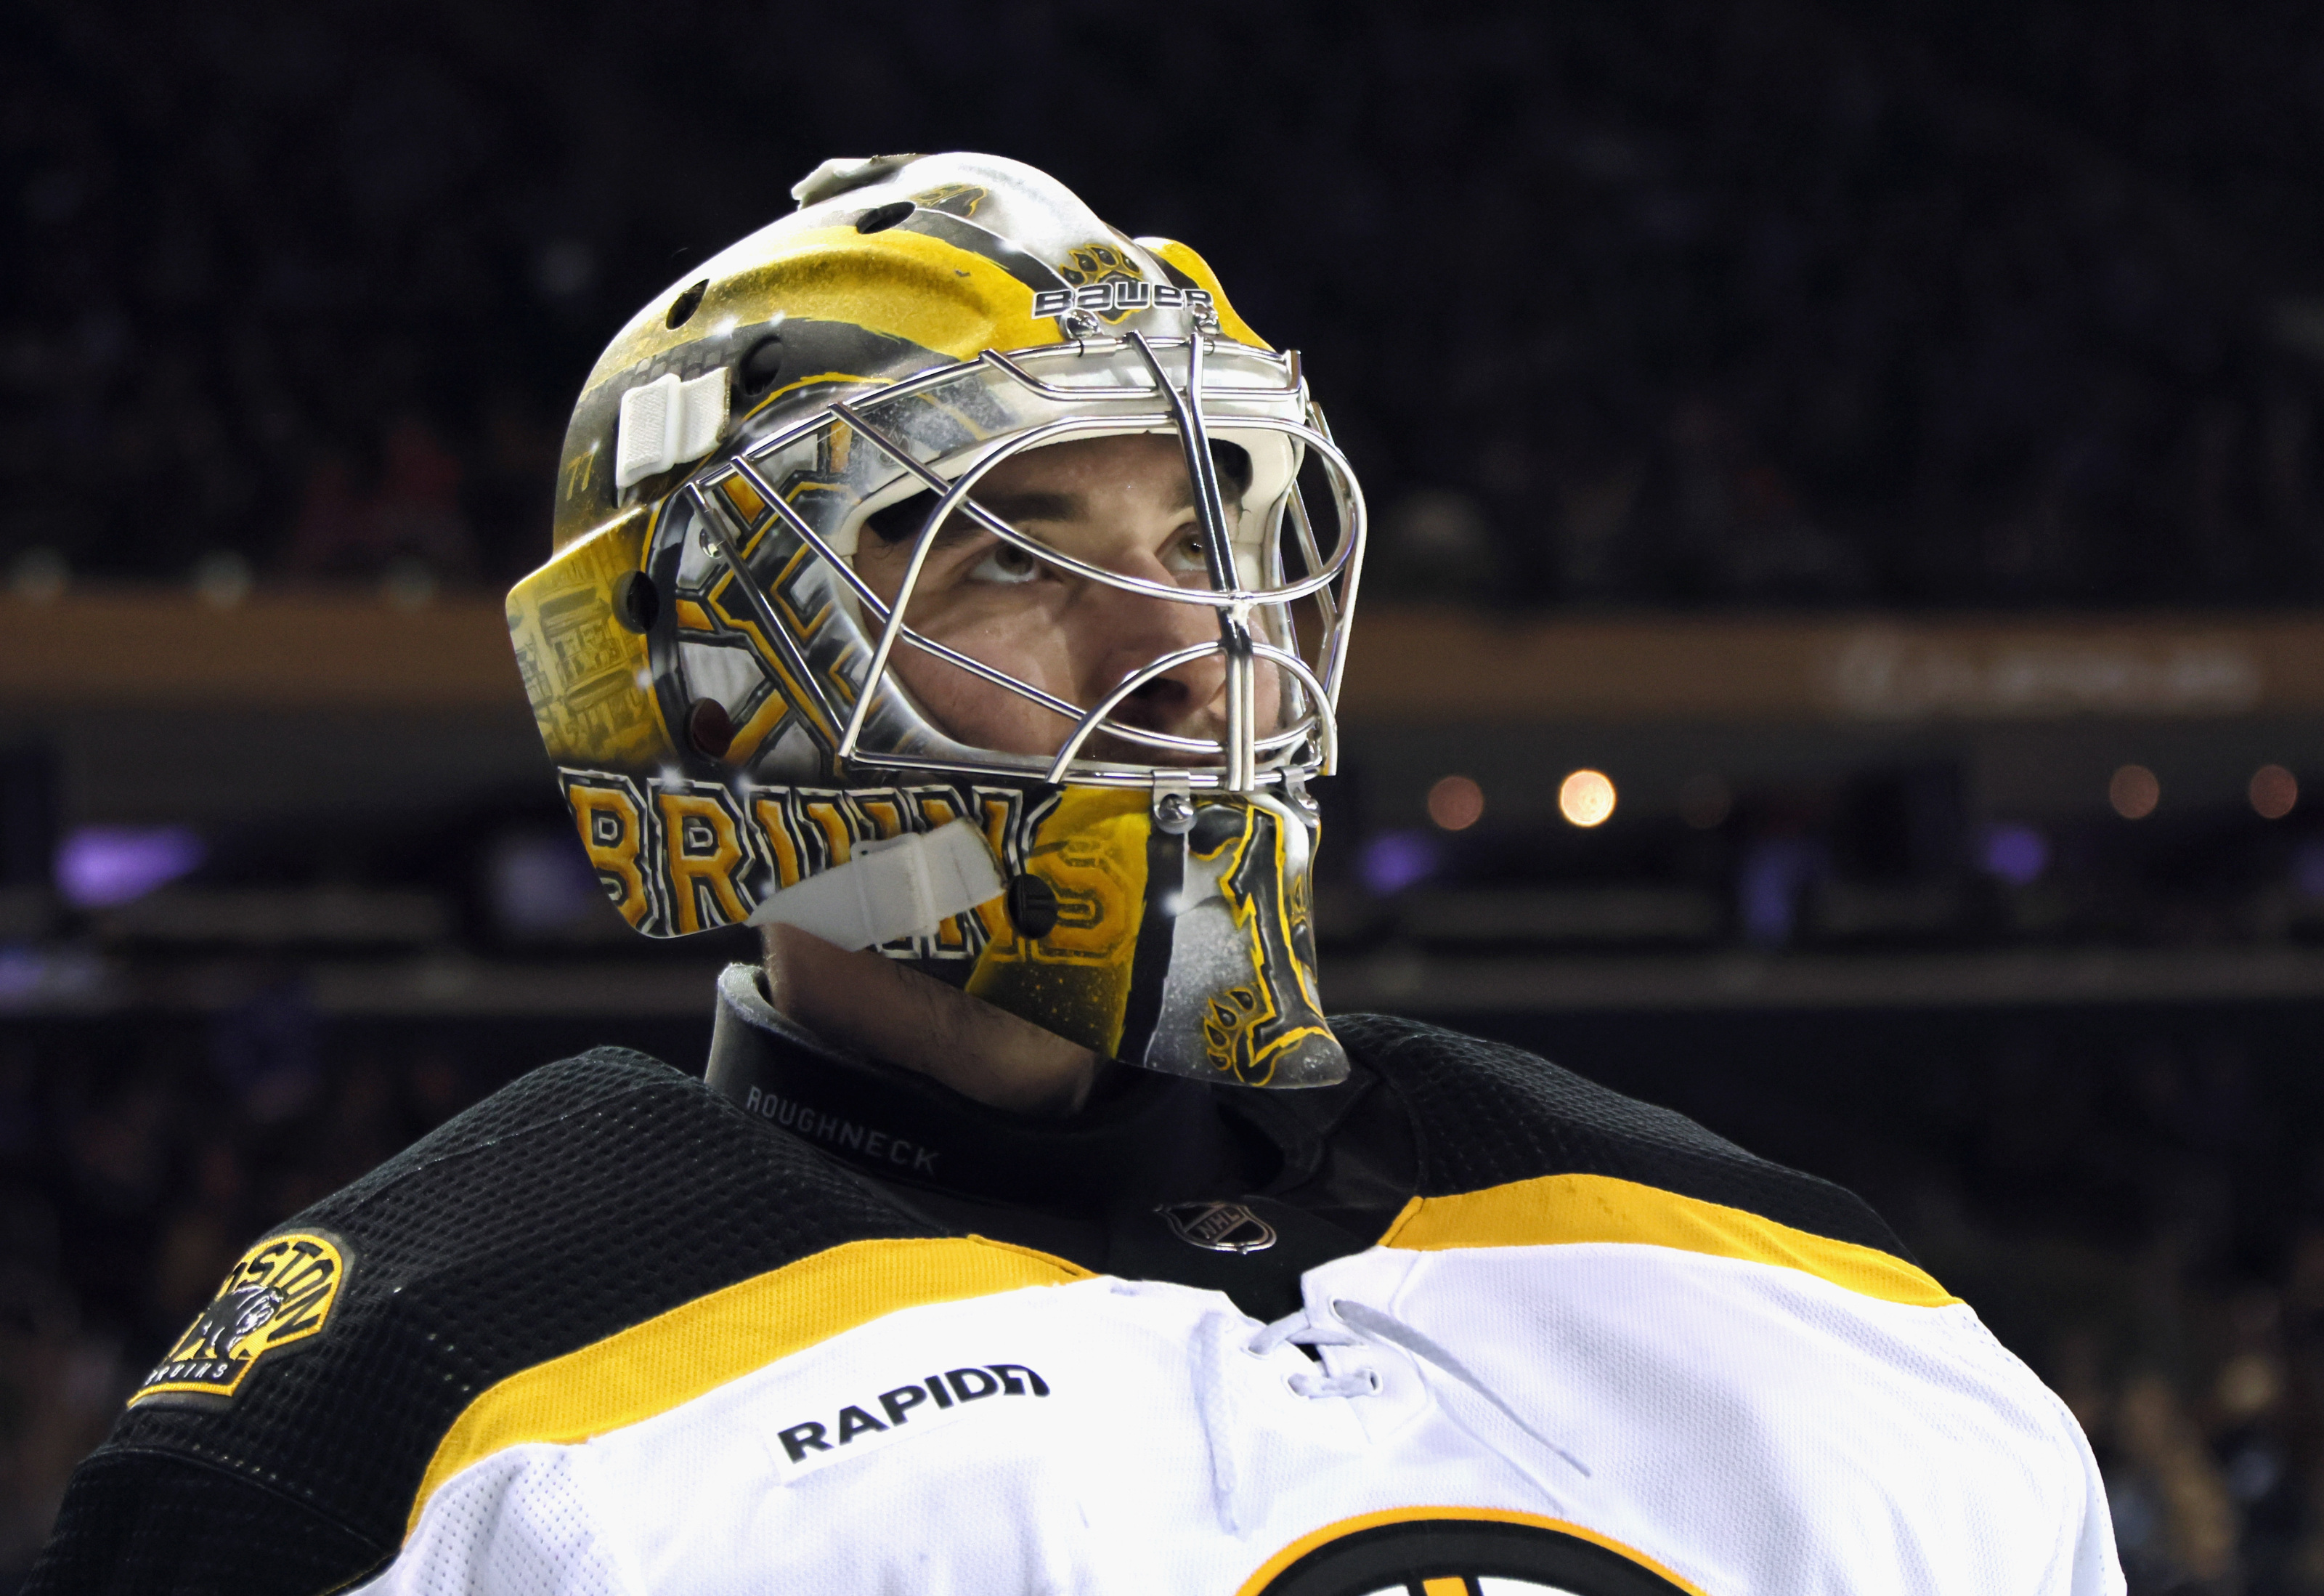 After sharpening his golf game, Bruins goalie Jeremy Swayman is excited  about fine-tuning his game at net - The Boston Globe